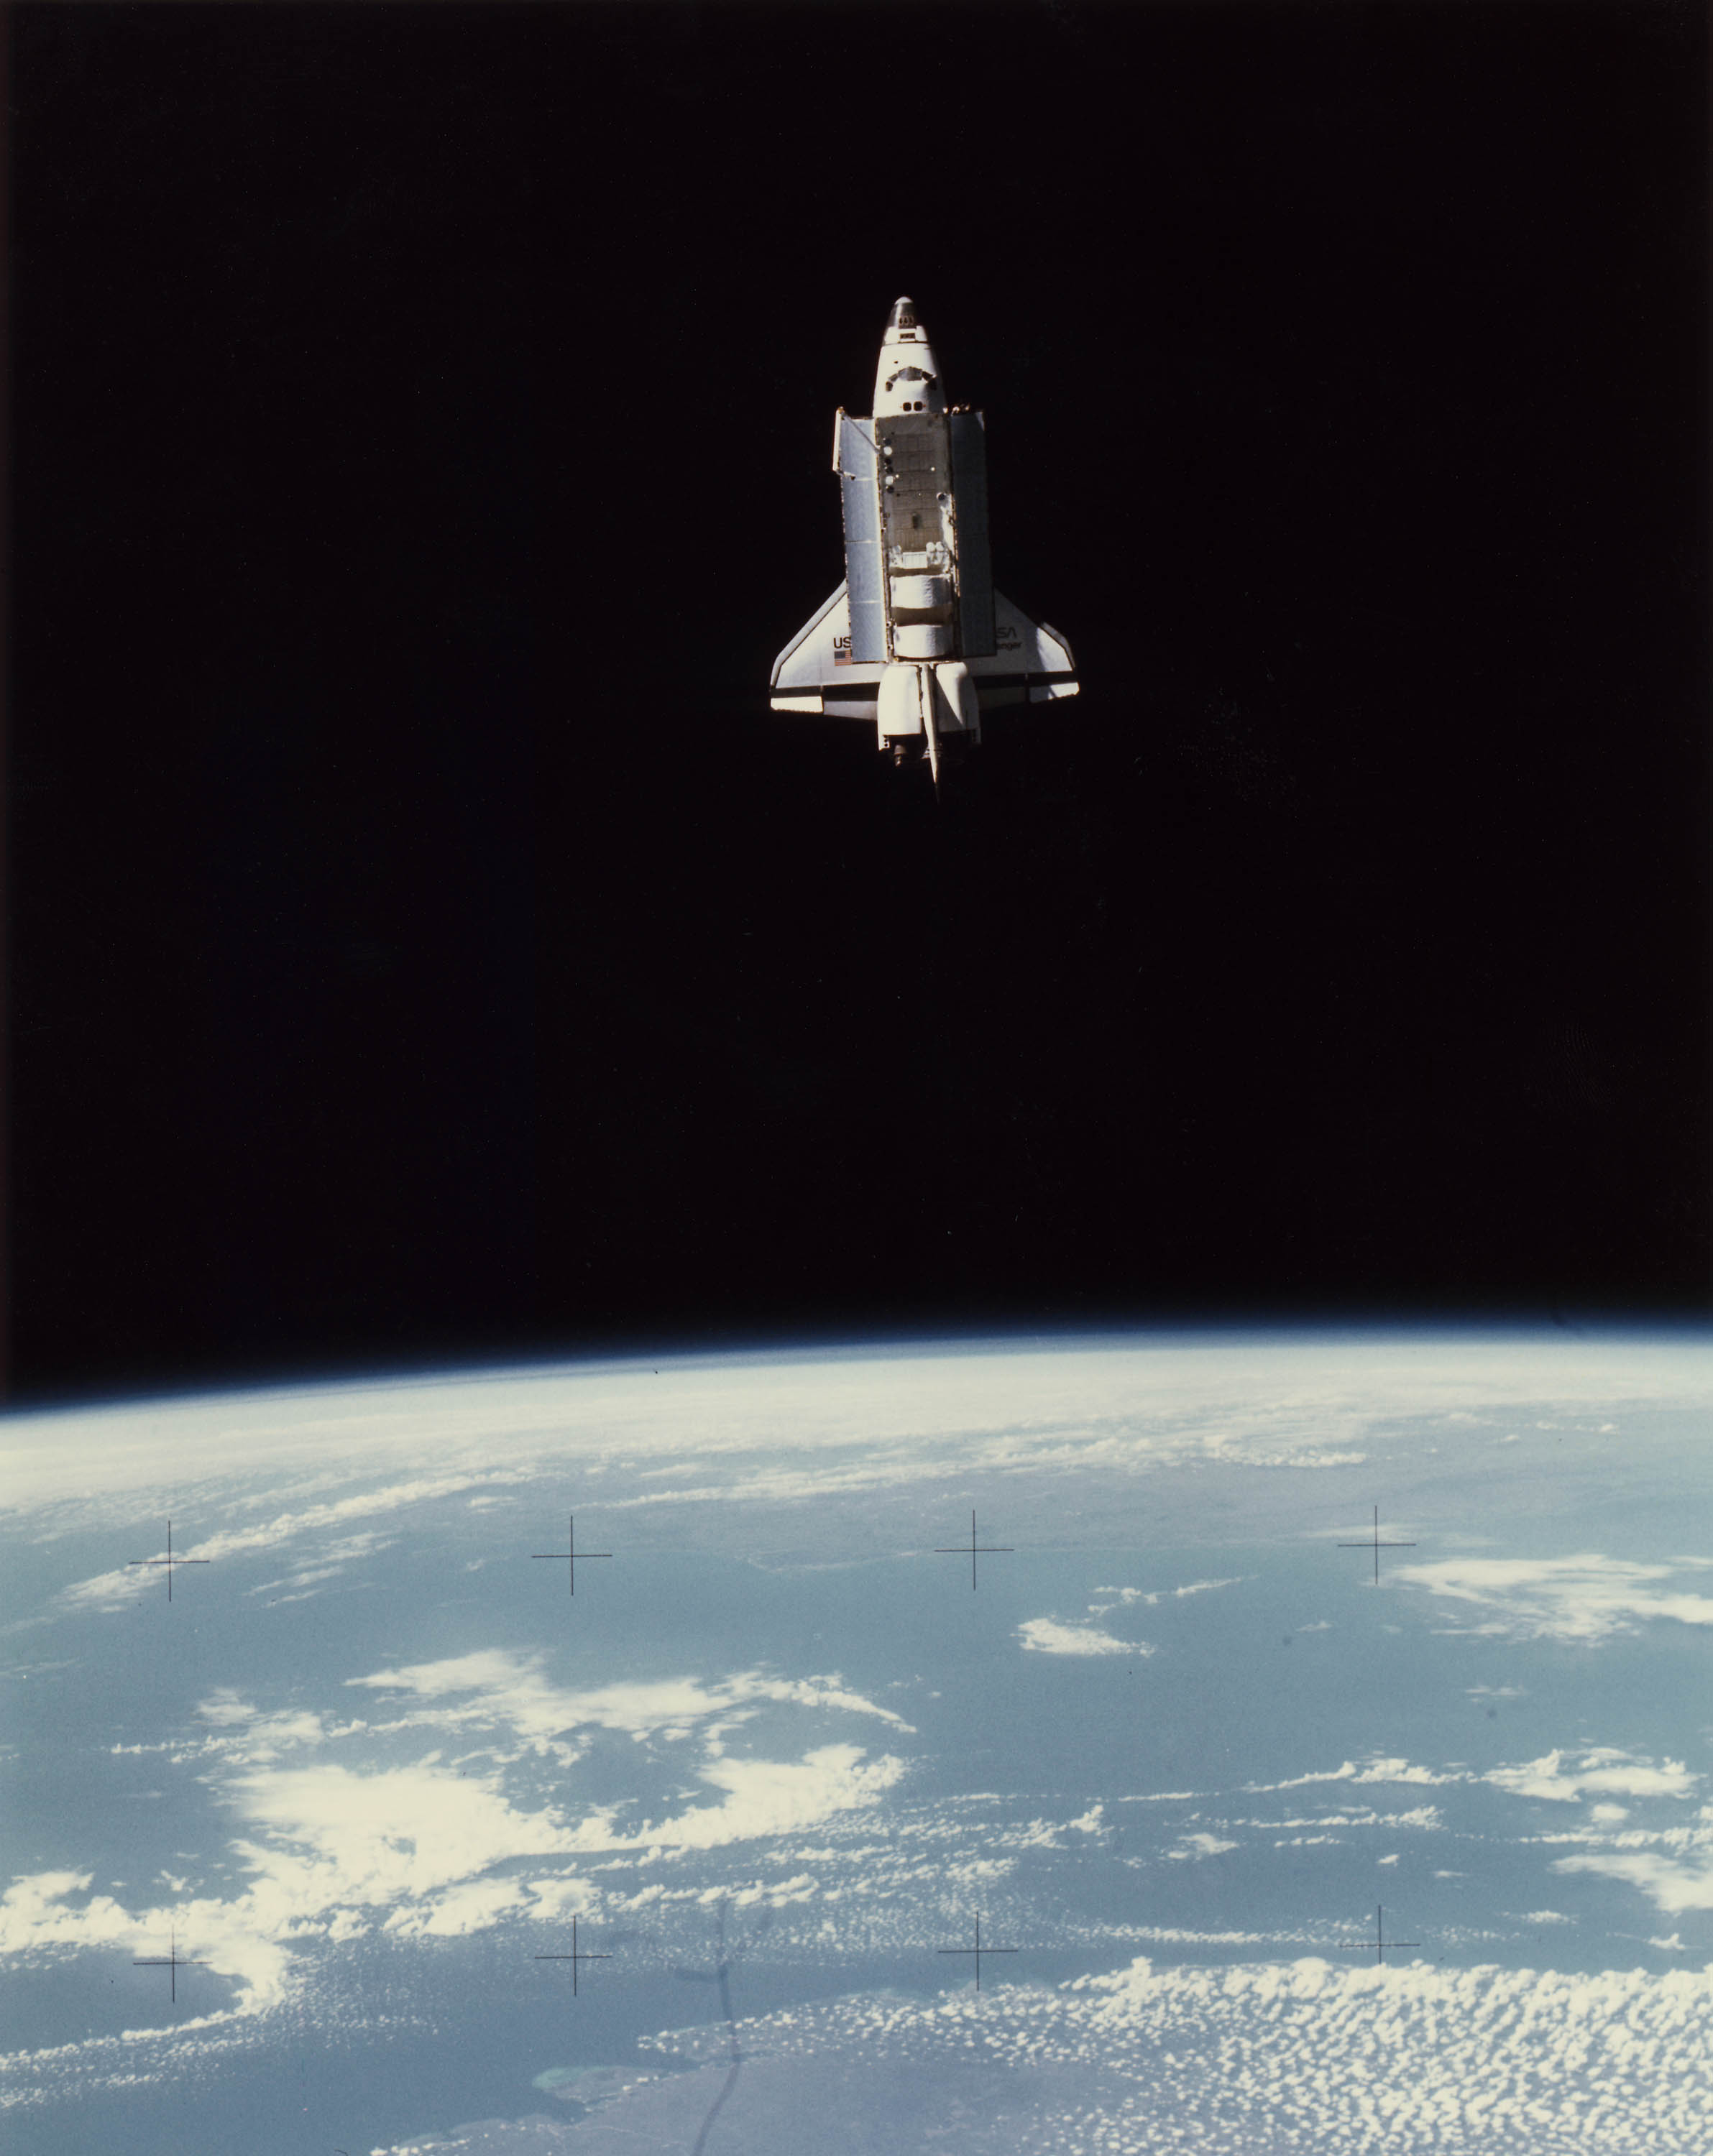 http://www.archives.gov/press/press-kits/picturing-the-century-photos/images/space-shuttle-challenger.jpg